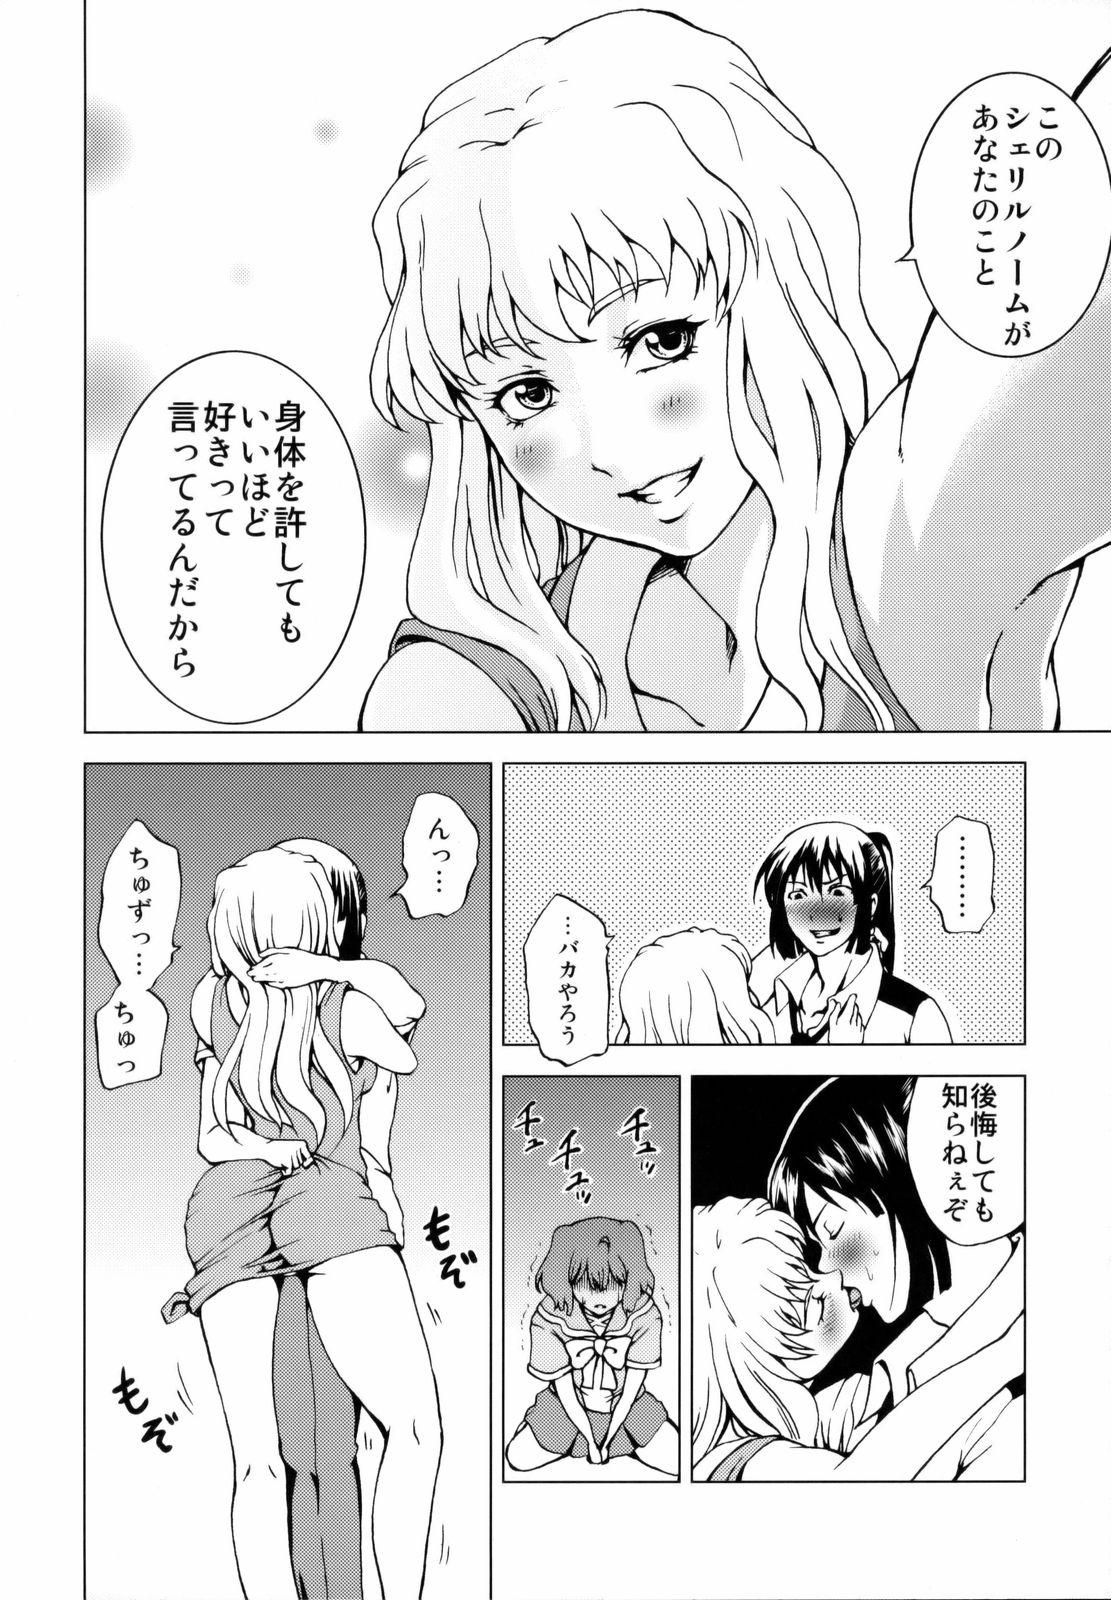 Adult First Lady - Macross frontier Pure 18 - Page 9